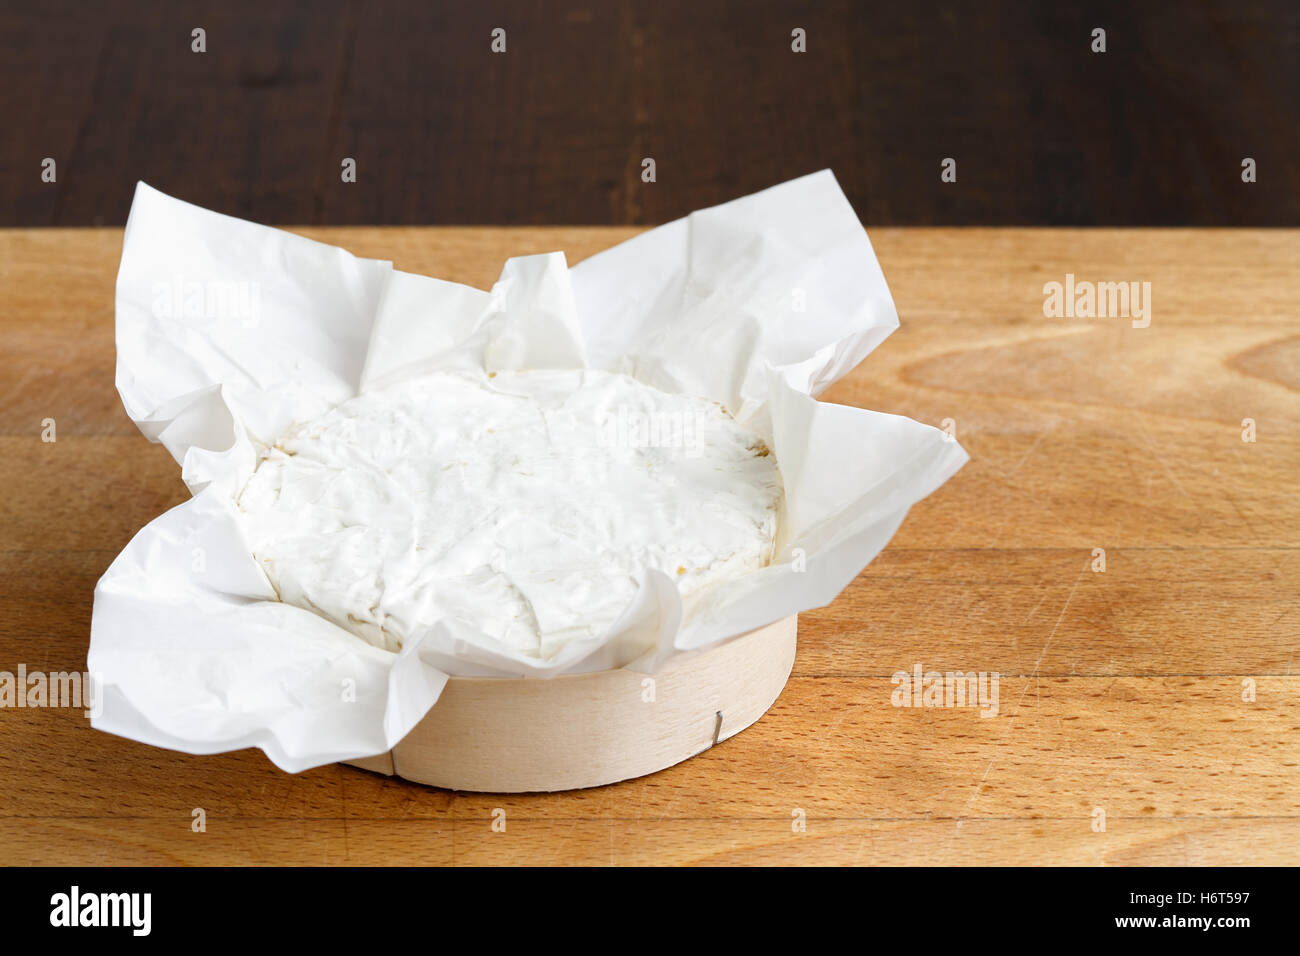 Whole white mould cheese in wrapping on wood board. Stock Photo